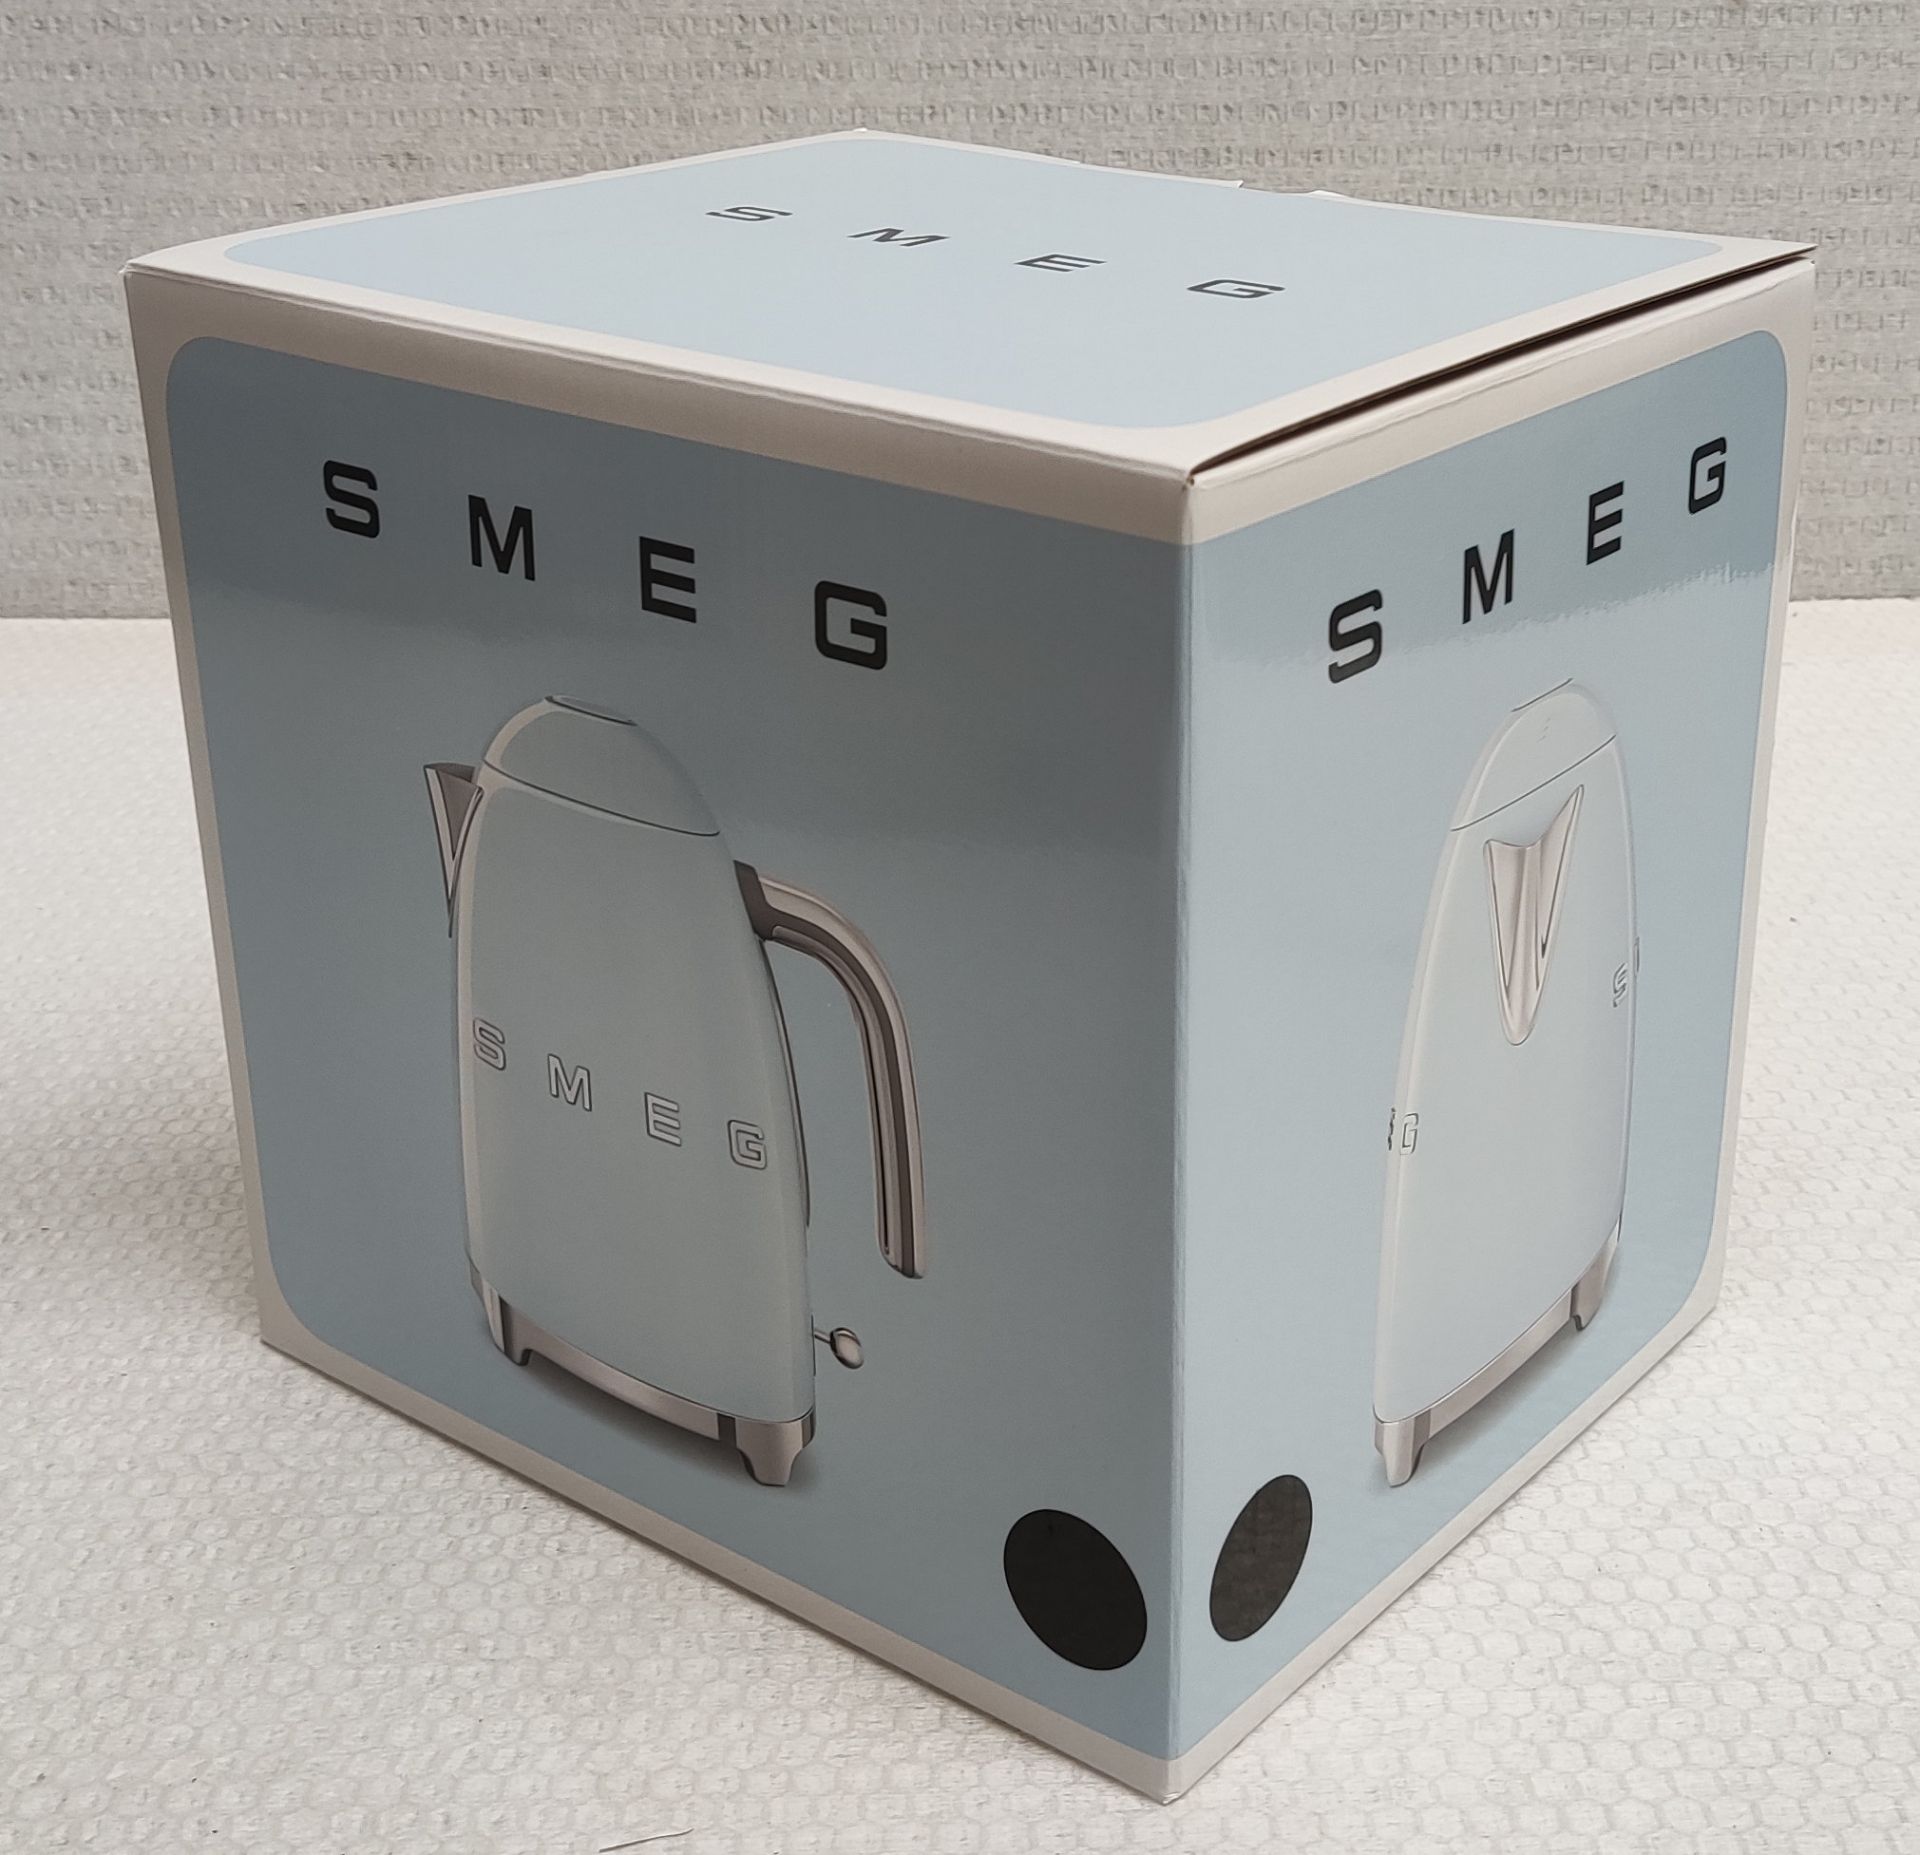 1 x SMEG 50'S Style Kettle In Black - Boxed - Original RRP £149.00 - Image 3 of 7